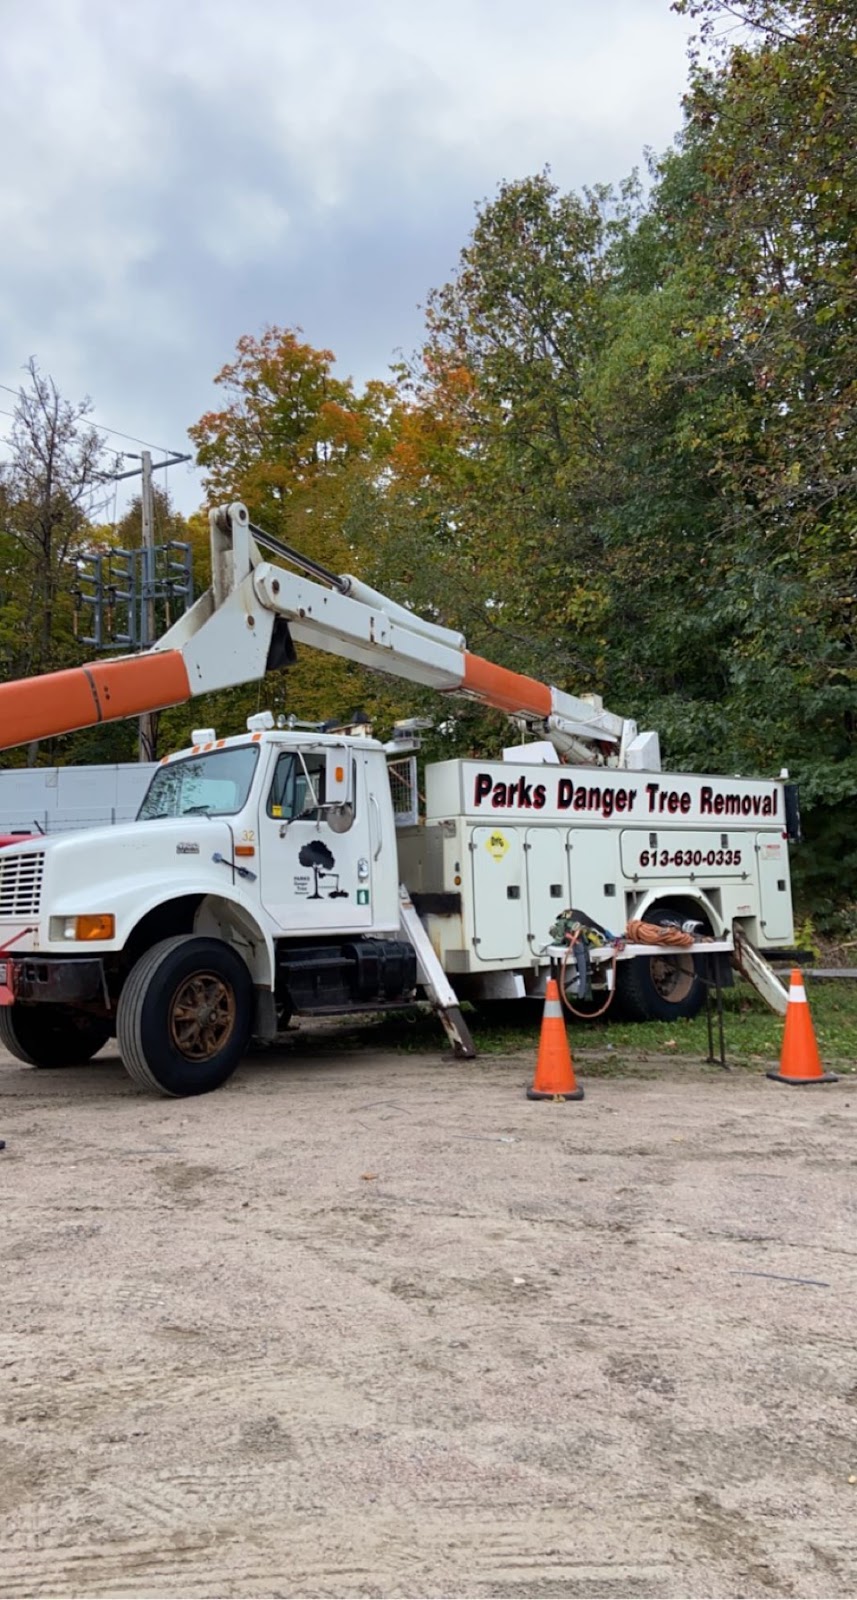 Parks Danger Tree Removal | ON-28, Bancroft, ON K0L 1C0, Canada | Phone: (613) 630-0335